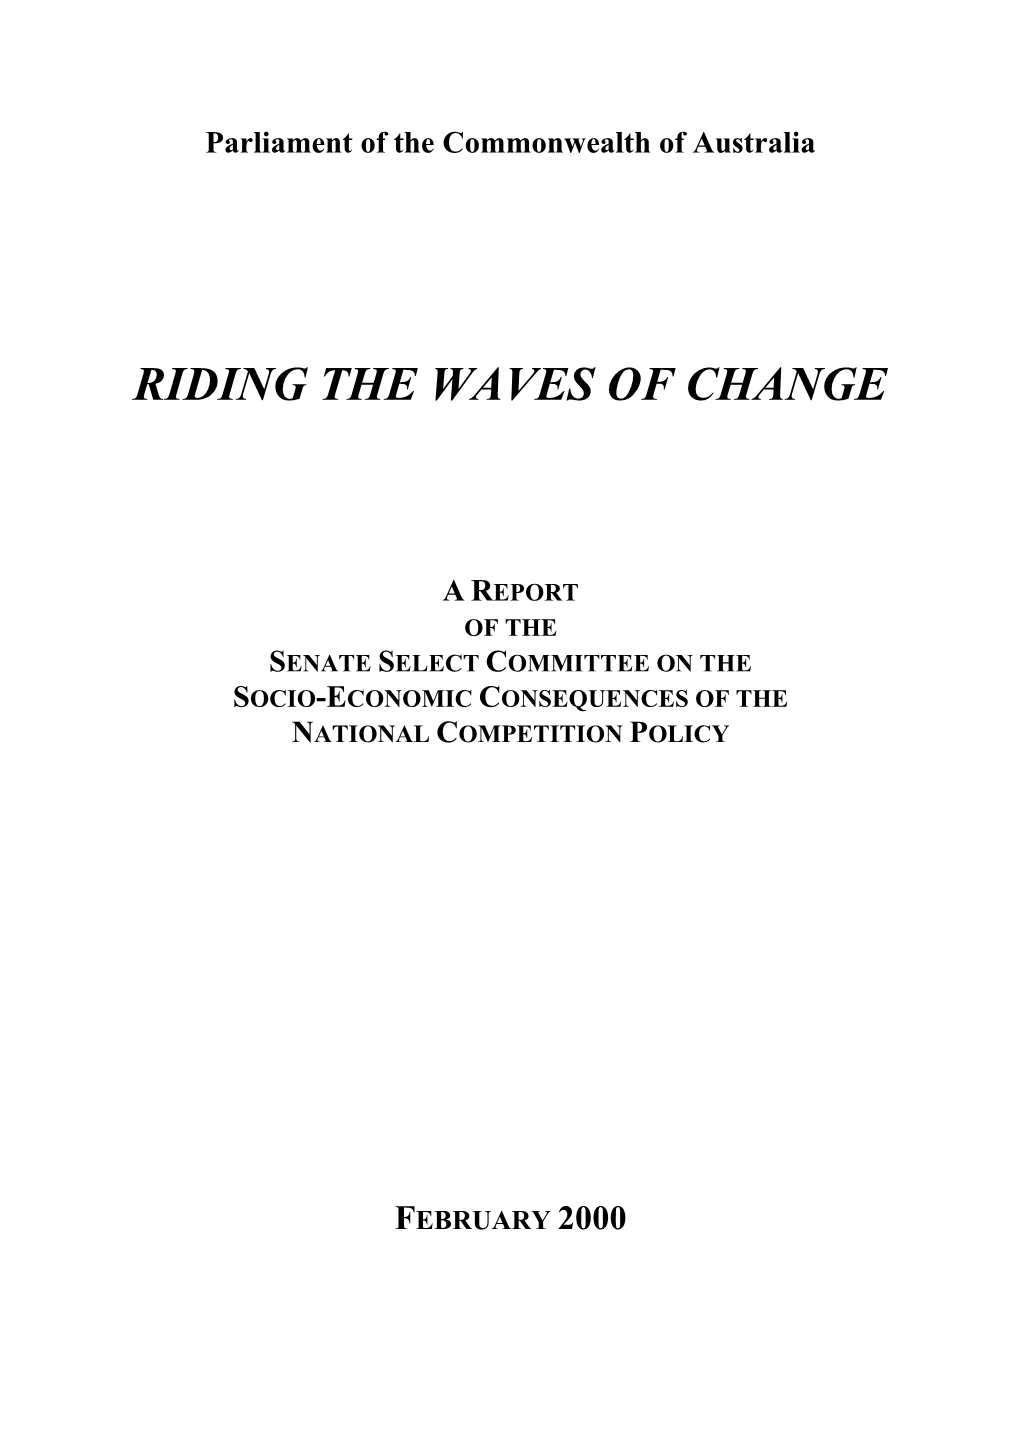 Riding the Waves of Change